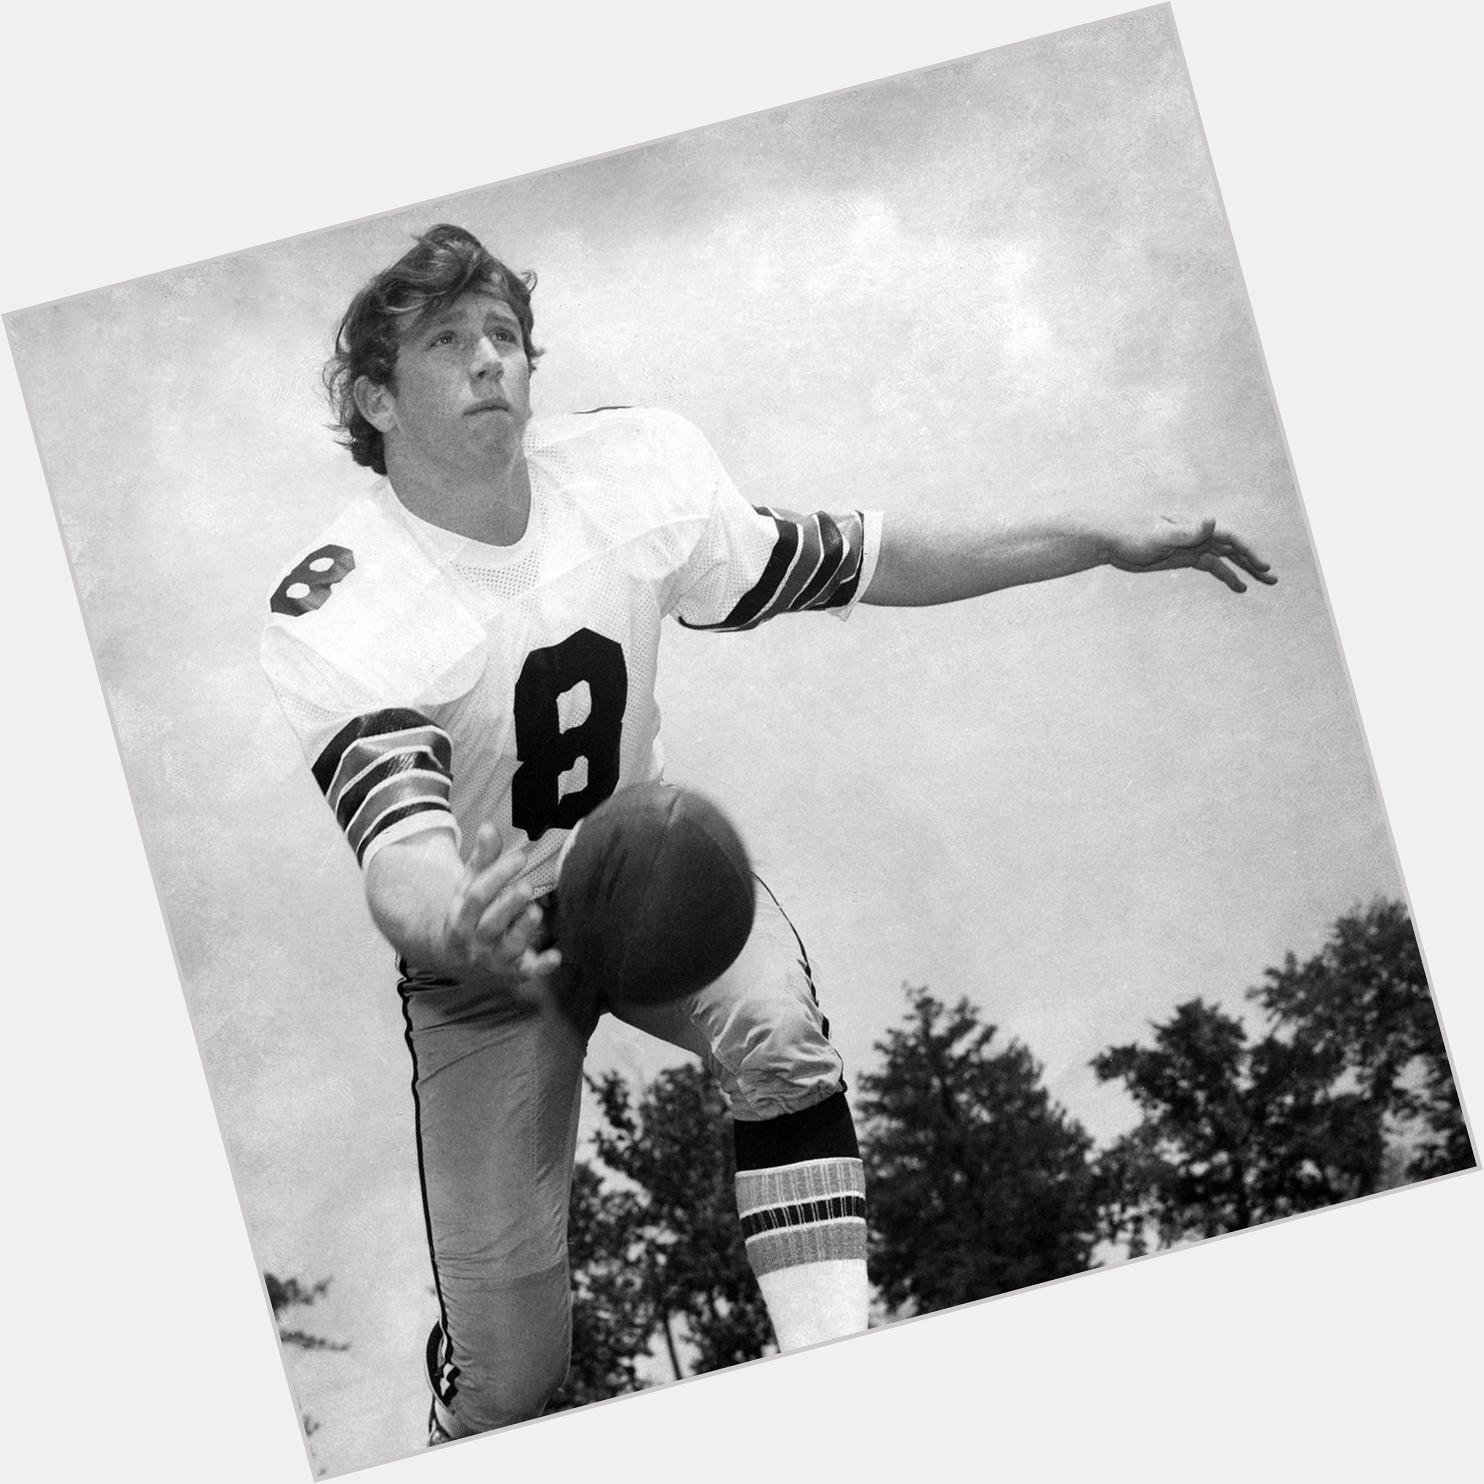 Before Peyton and Eli...
There was Archie.

Happy 66th Birthday, Archie Manning! 